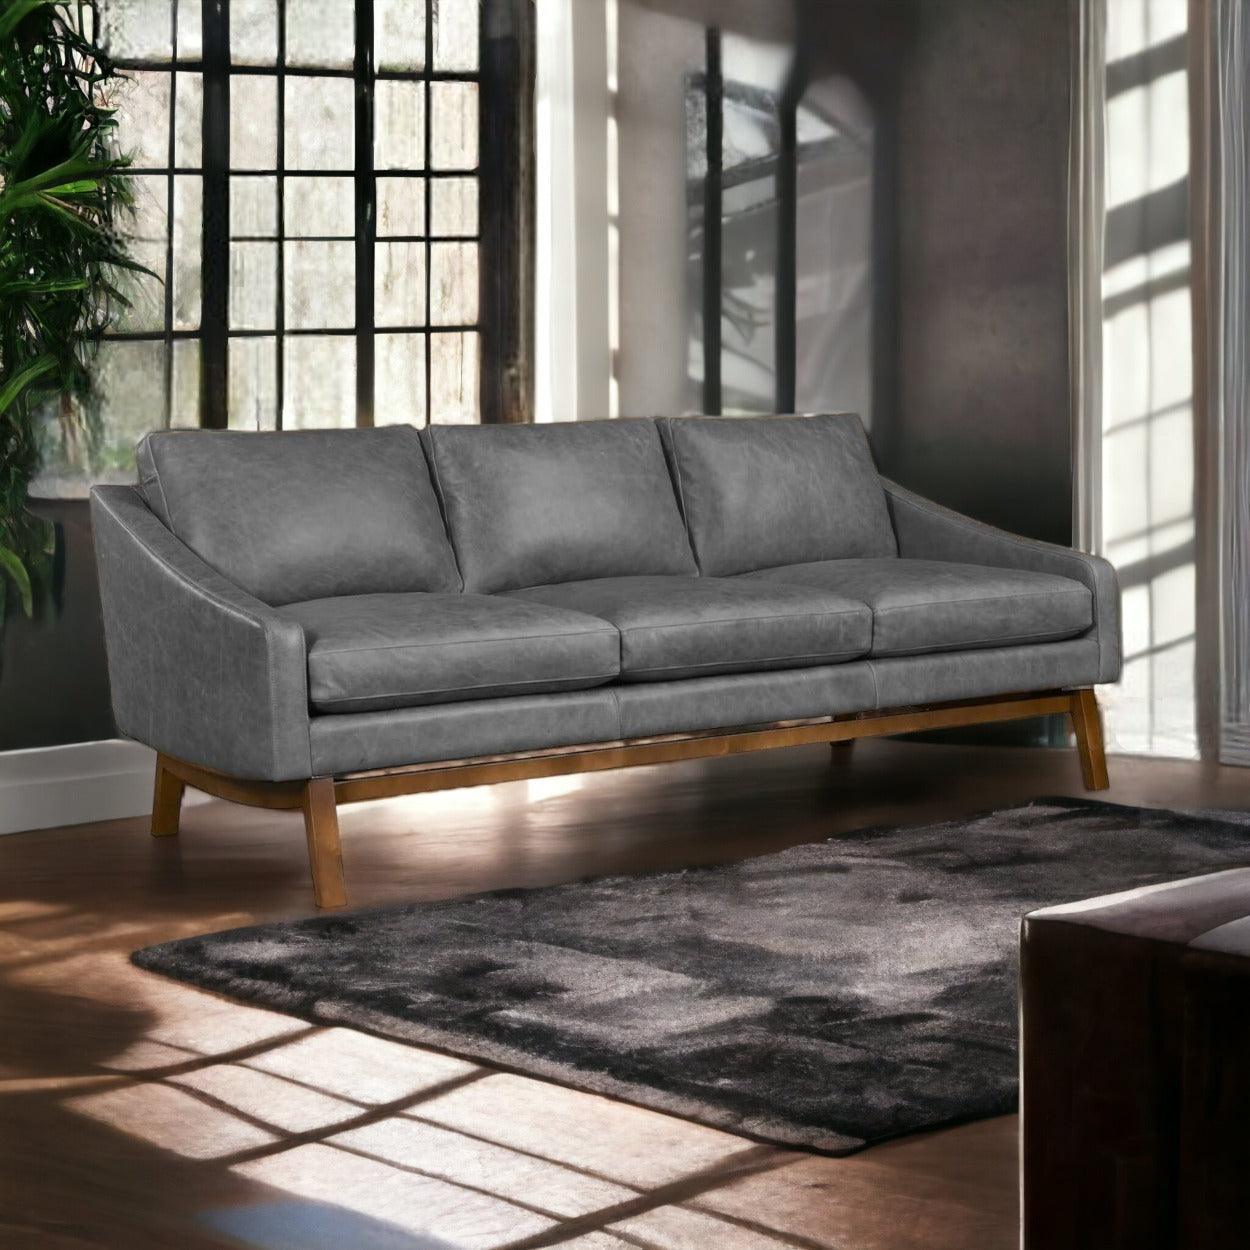 Dutch Full Aniline Pull Up Leather Sofa Made to Order - Uptown Sebastian